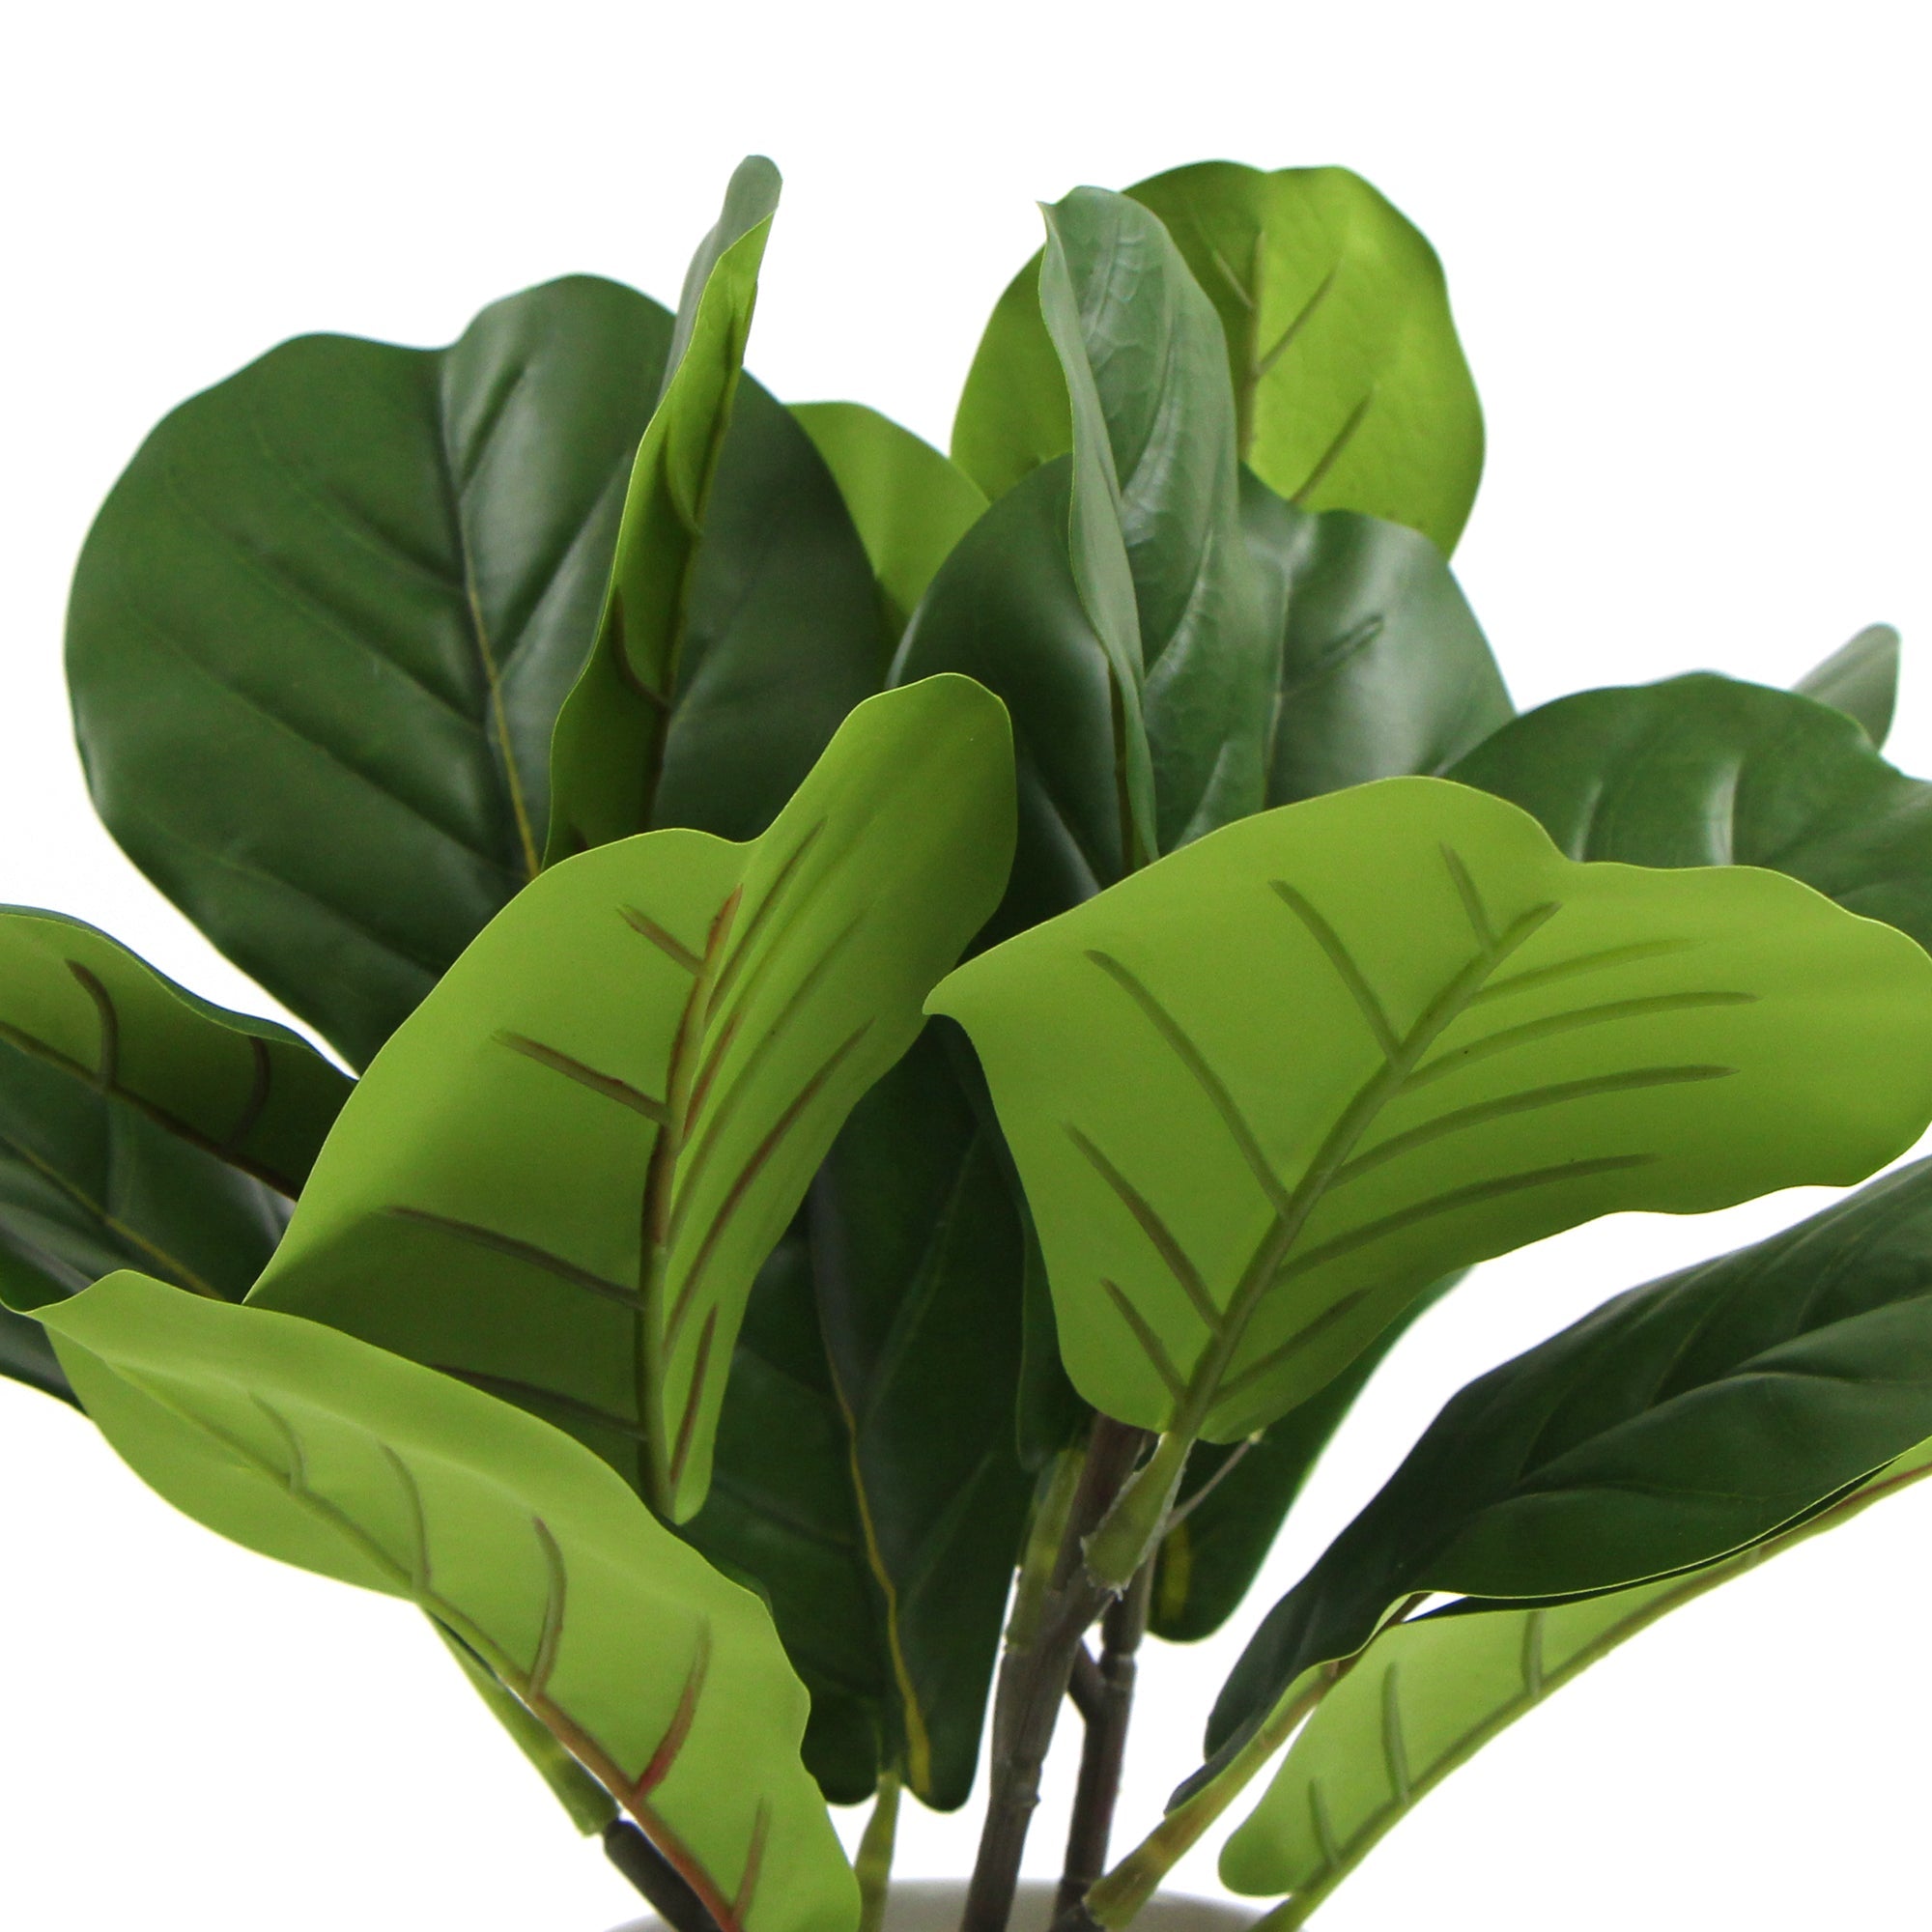 Decorative Potted Dense Artificial Fiddle Leaf Fig In Beautiful Decorative Bowl 37cm - Designer Vertical Gardens artificial shrubs Artificial Shrubs and Small plants